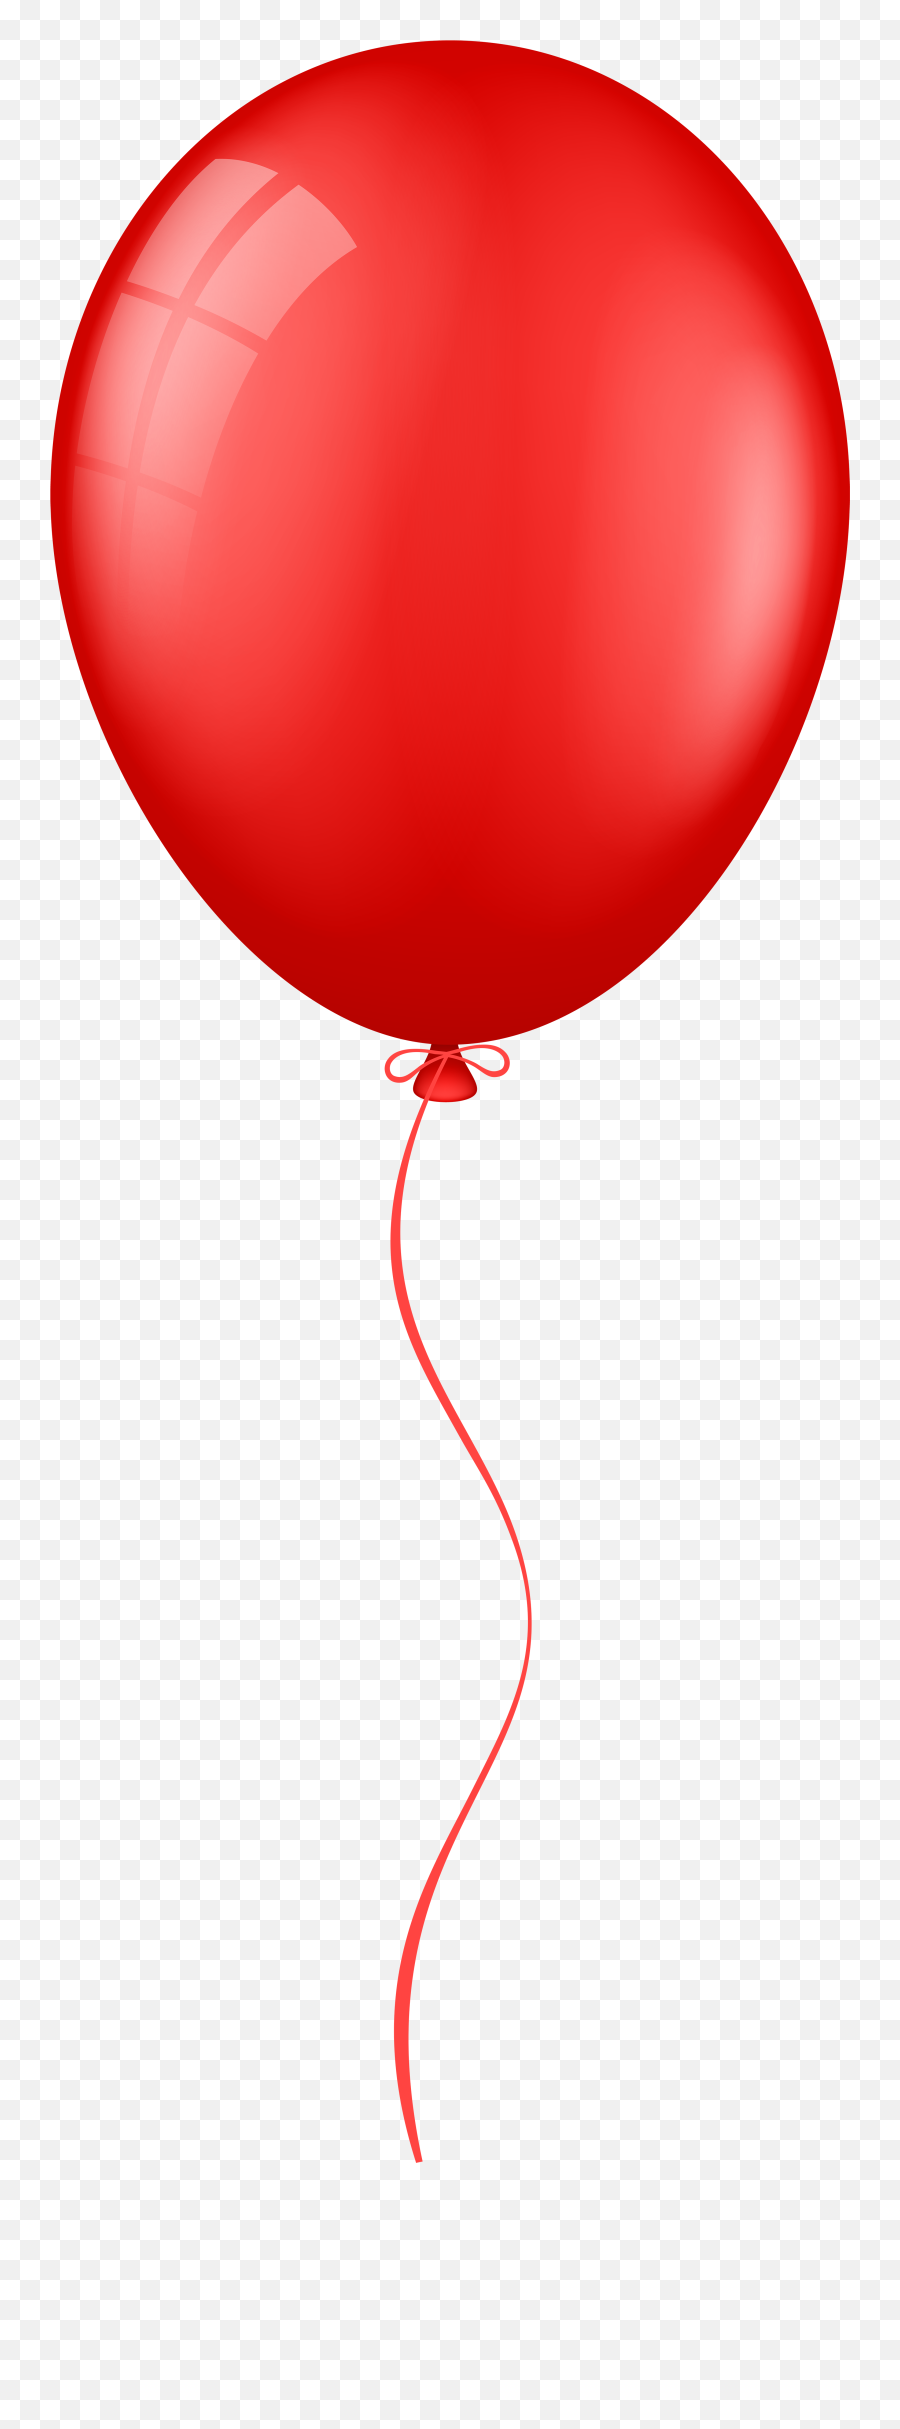 Free Red Balloon Transparent Background Download Free Clip - Cartoon Transparent Background Balloon Emoji,Red Balloon Emoji